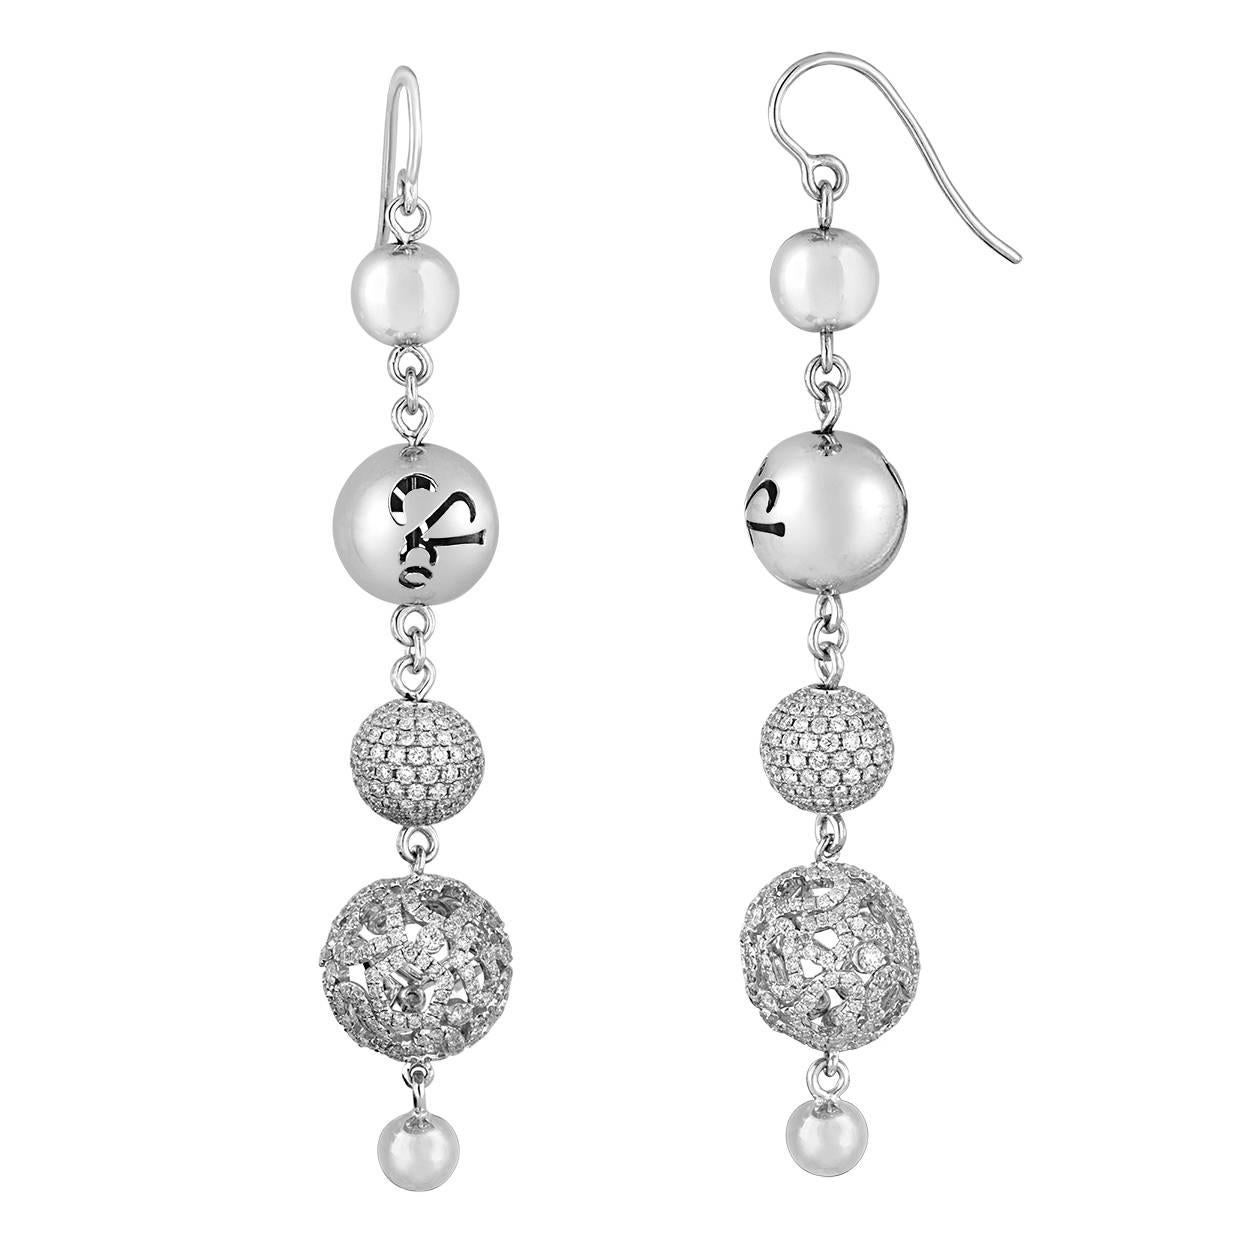 Jacob & Co. 4.64 Carats Diamond Gold Lace Ball Drop Earrings For Sale